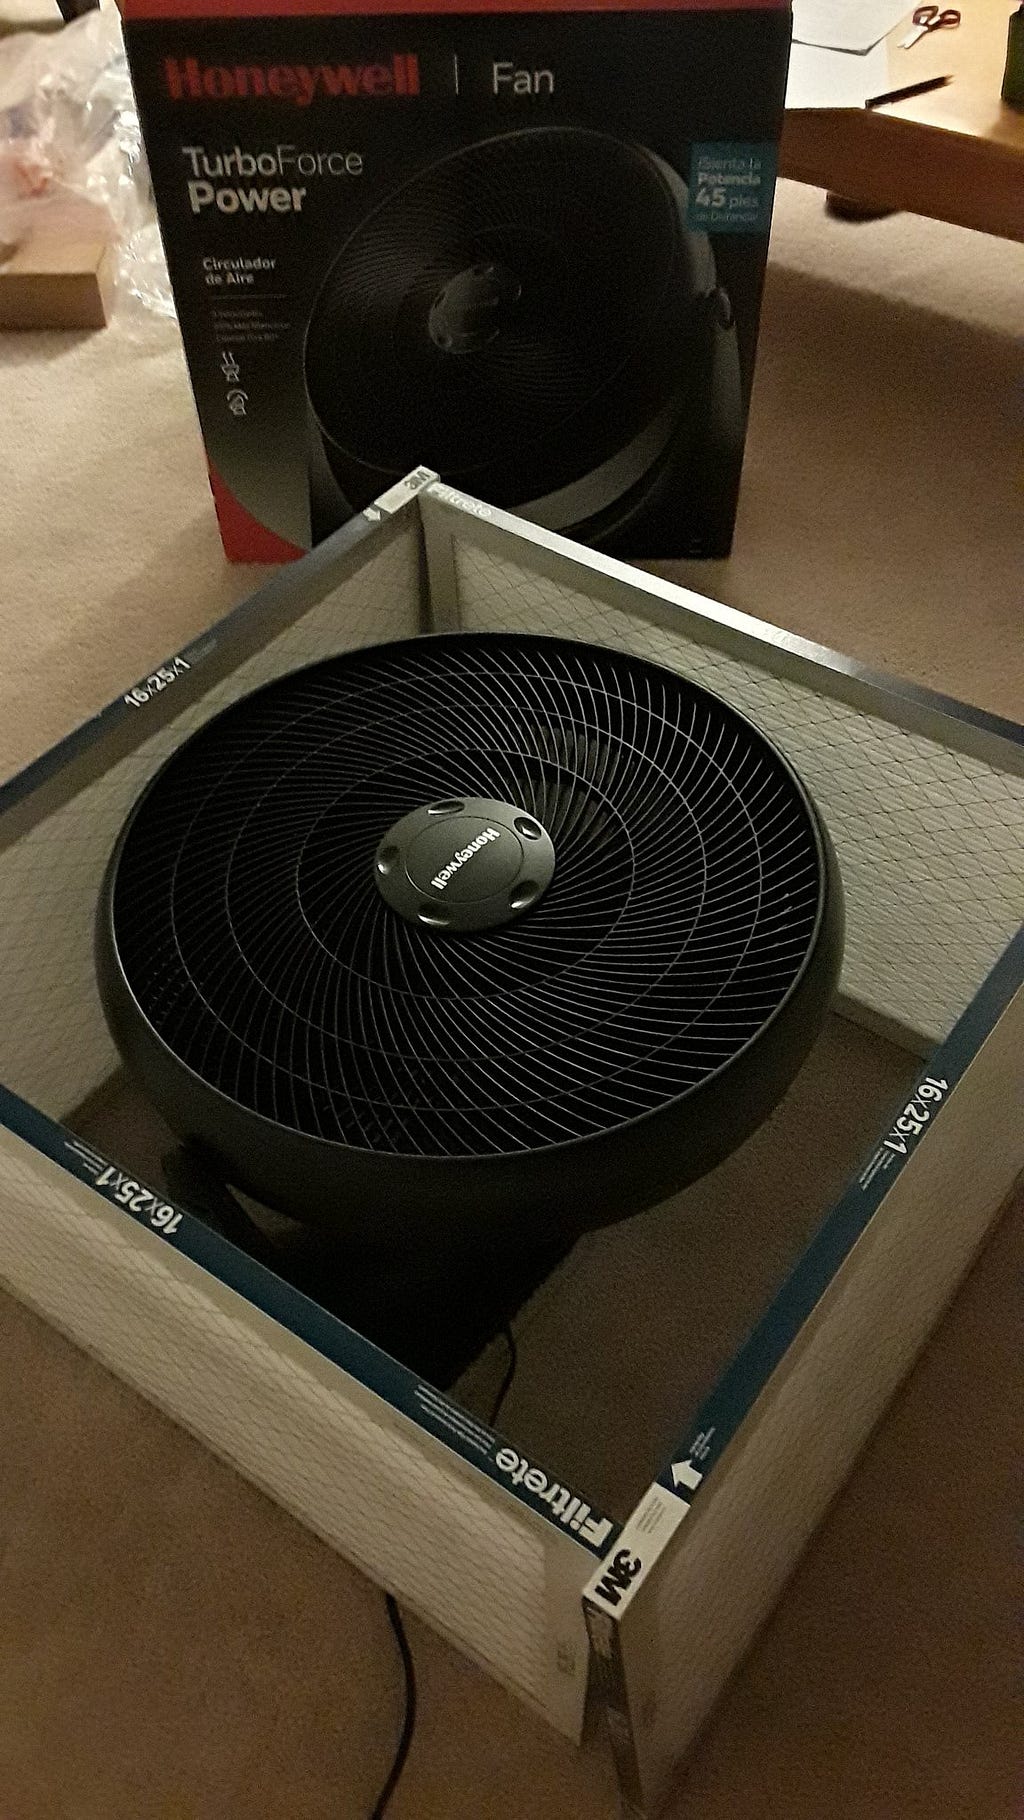 Test the position of the fan within the box